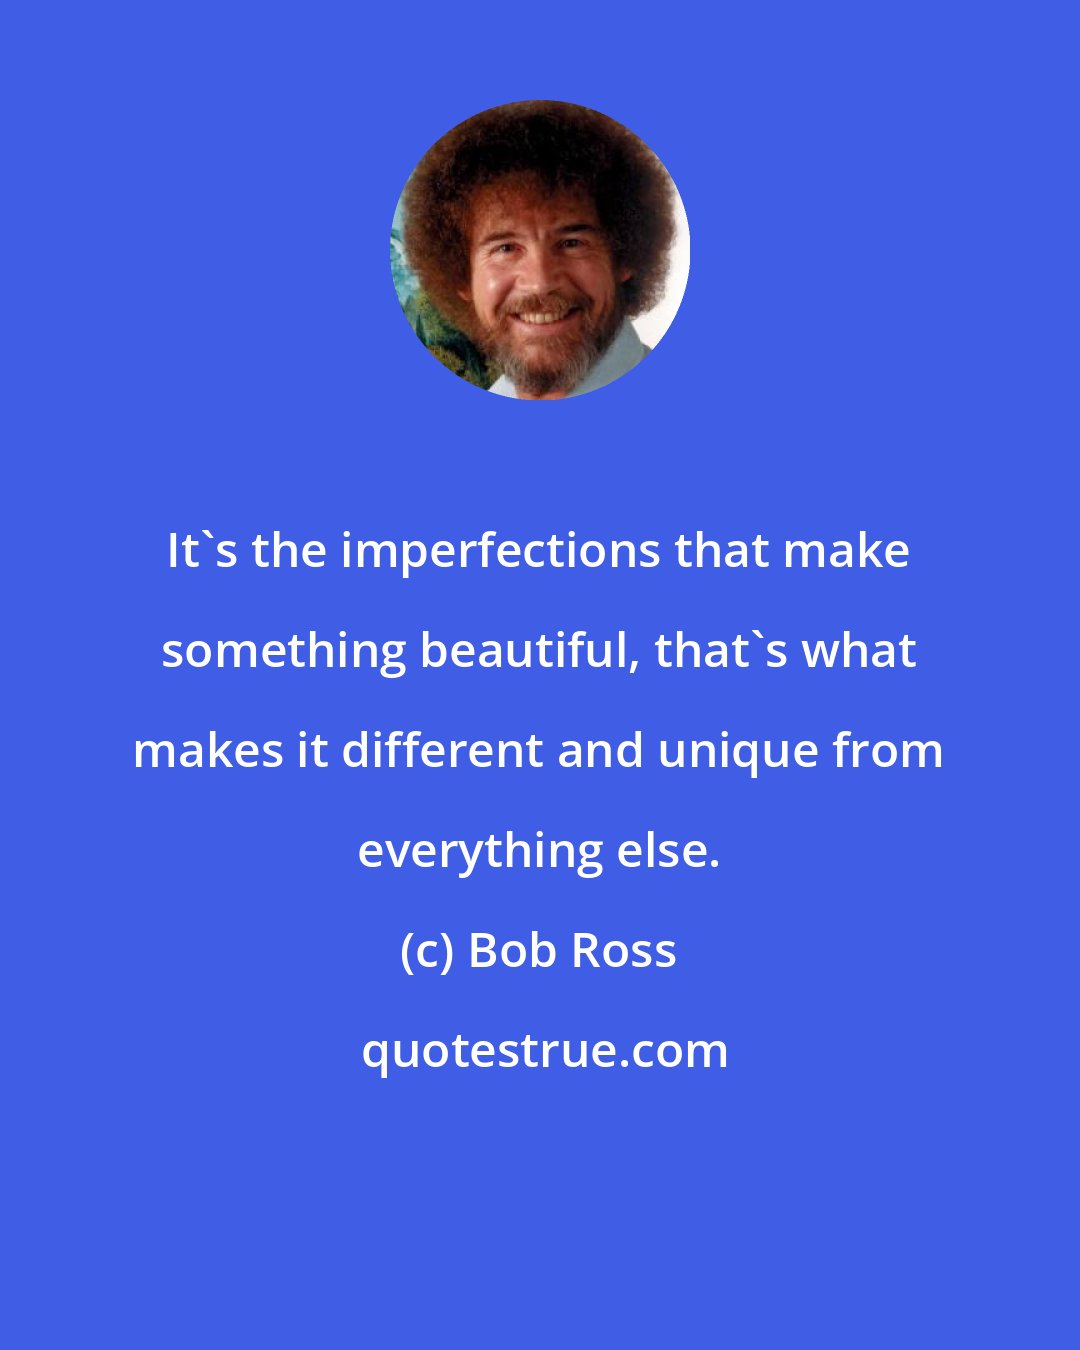 Bob Ross: It's the imperfections that make something beautiful, that's what makes it different and unique from everything else.